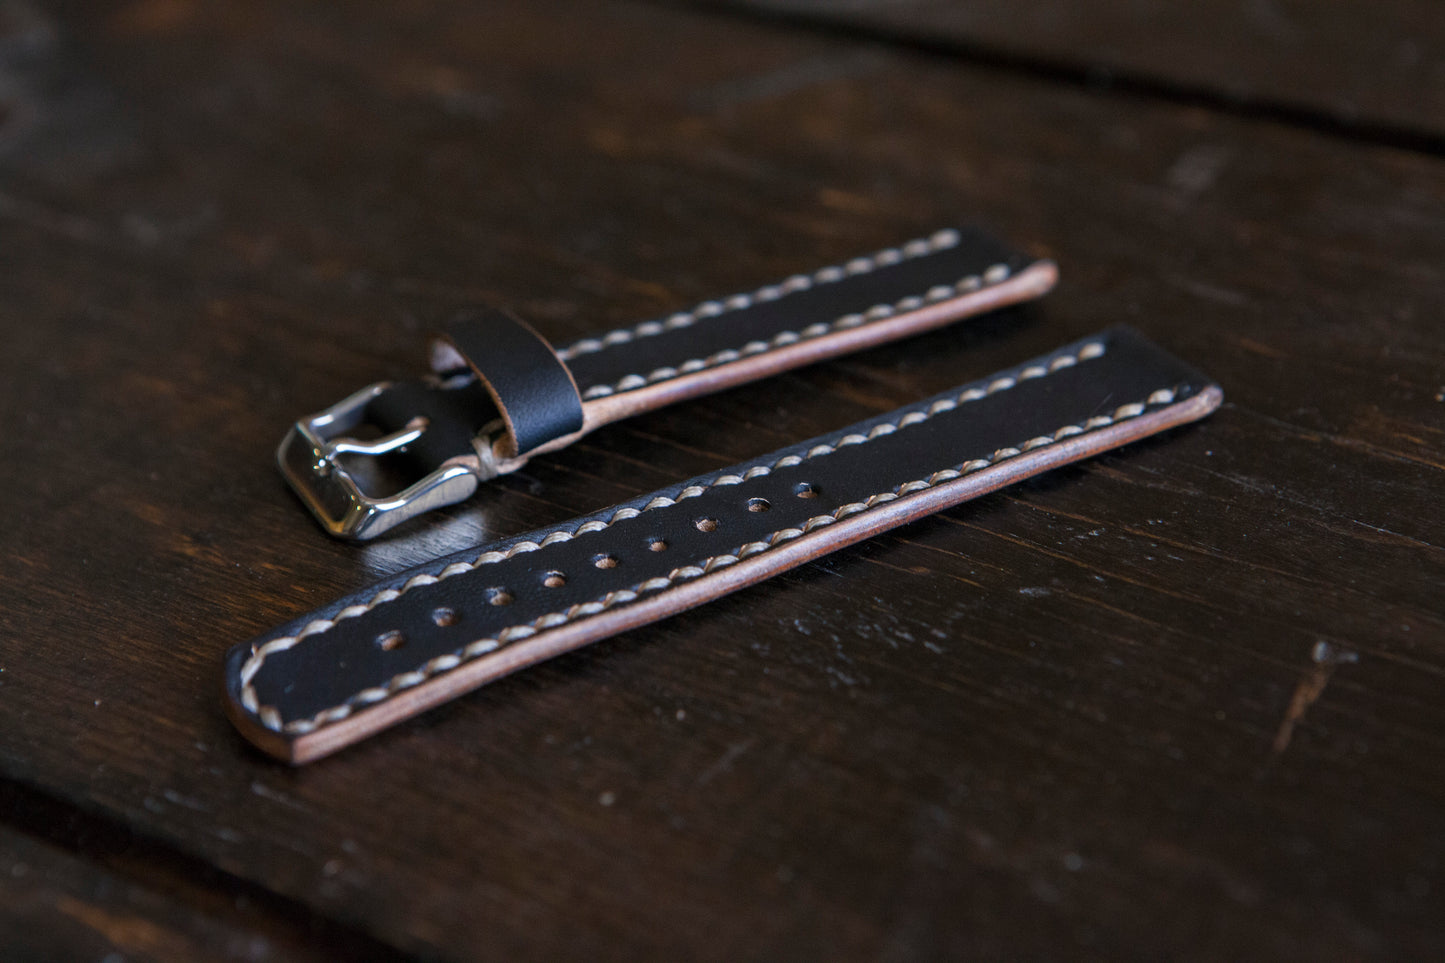 18 - 22mm Painted Black Teacore (fades to brown) Watch Strap Hand Stitched Made to Order and Customizable